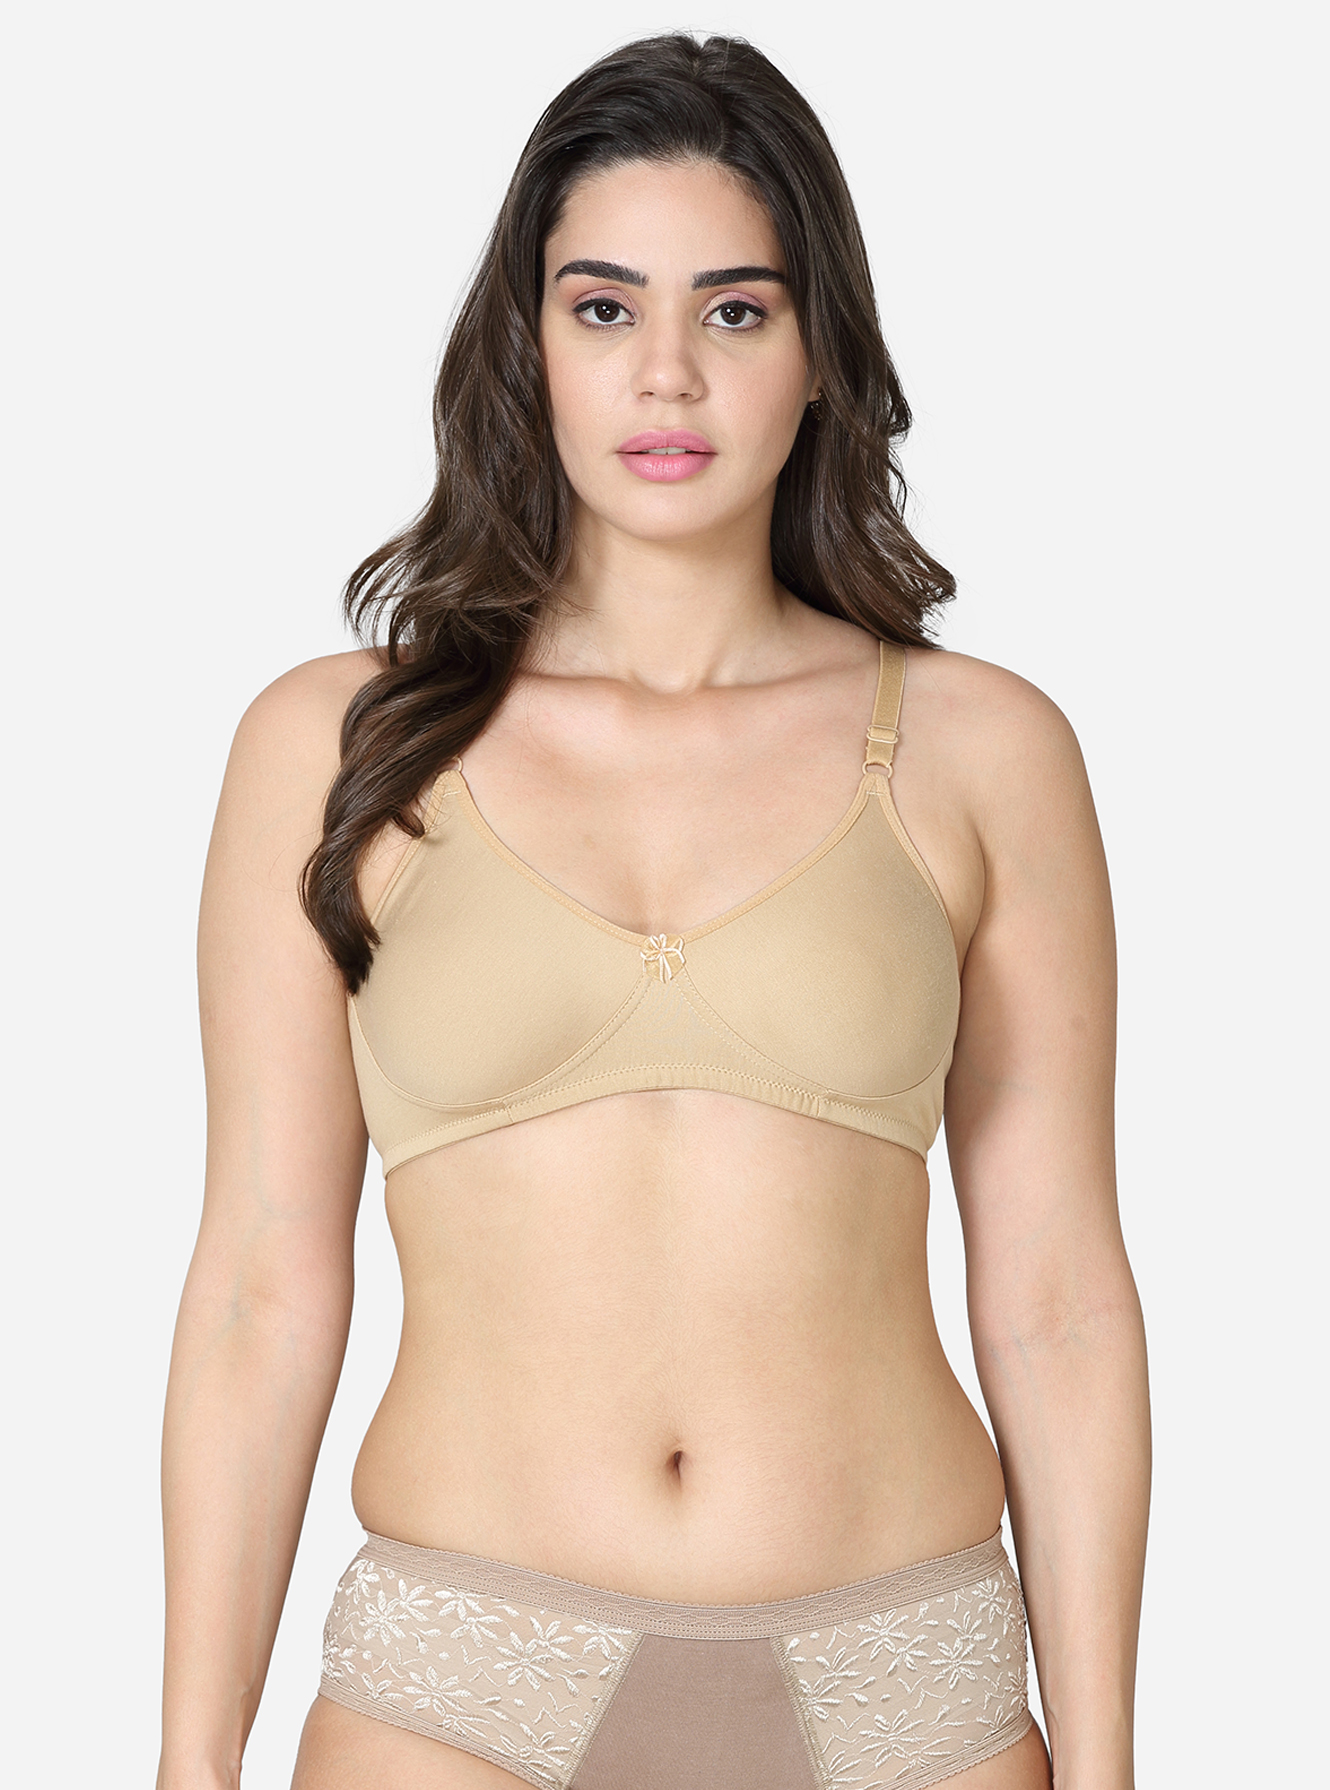 Full coverage daily wear bra with hidden side shaper panels